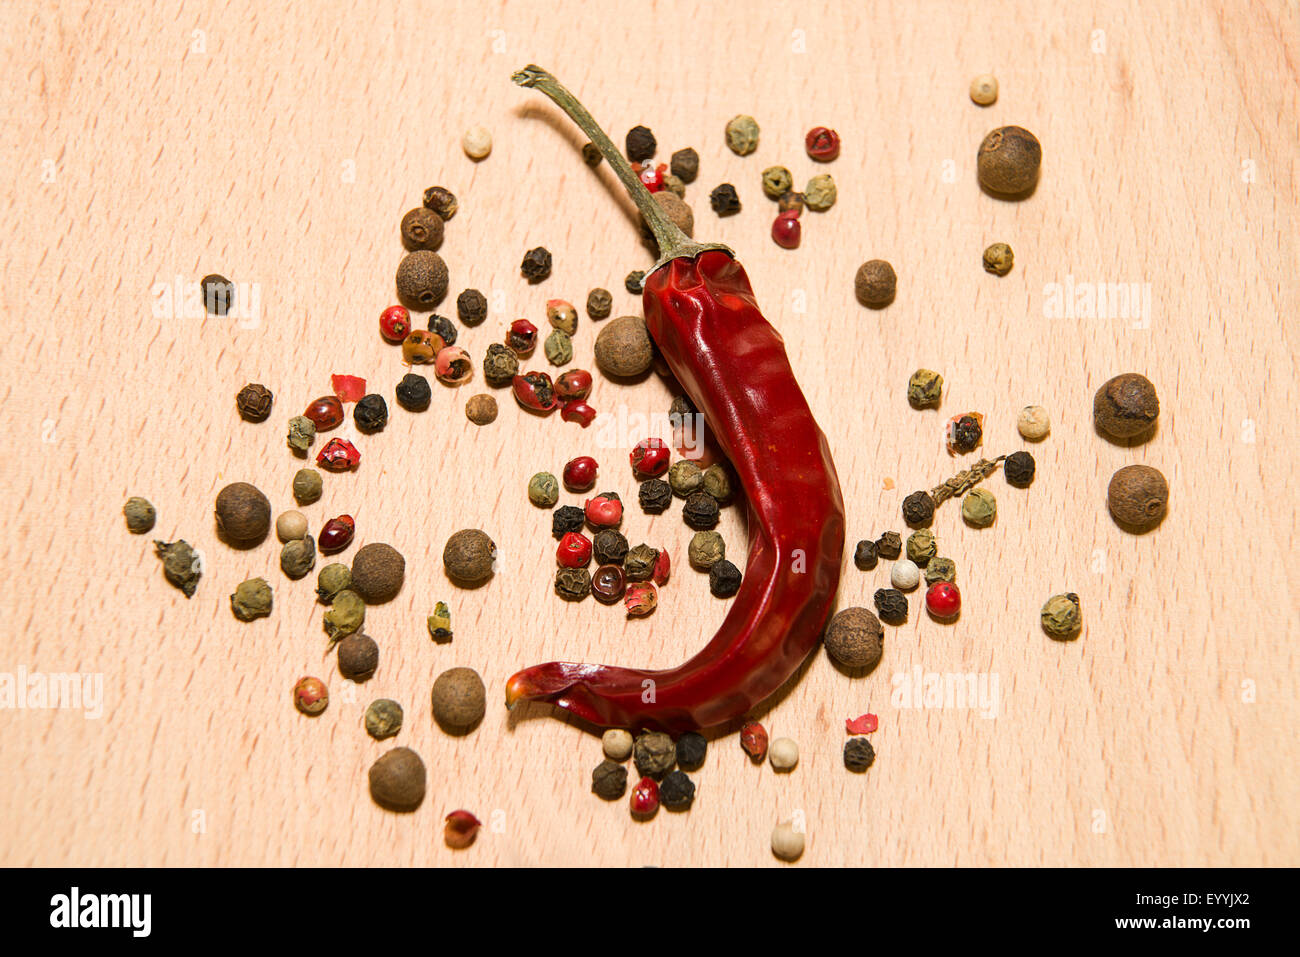 Chili pepper and mix the grains are on a wooden surface Stock Photo